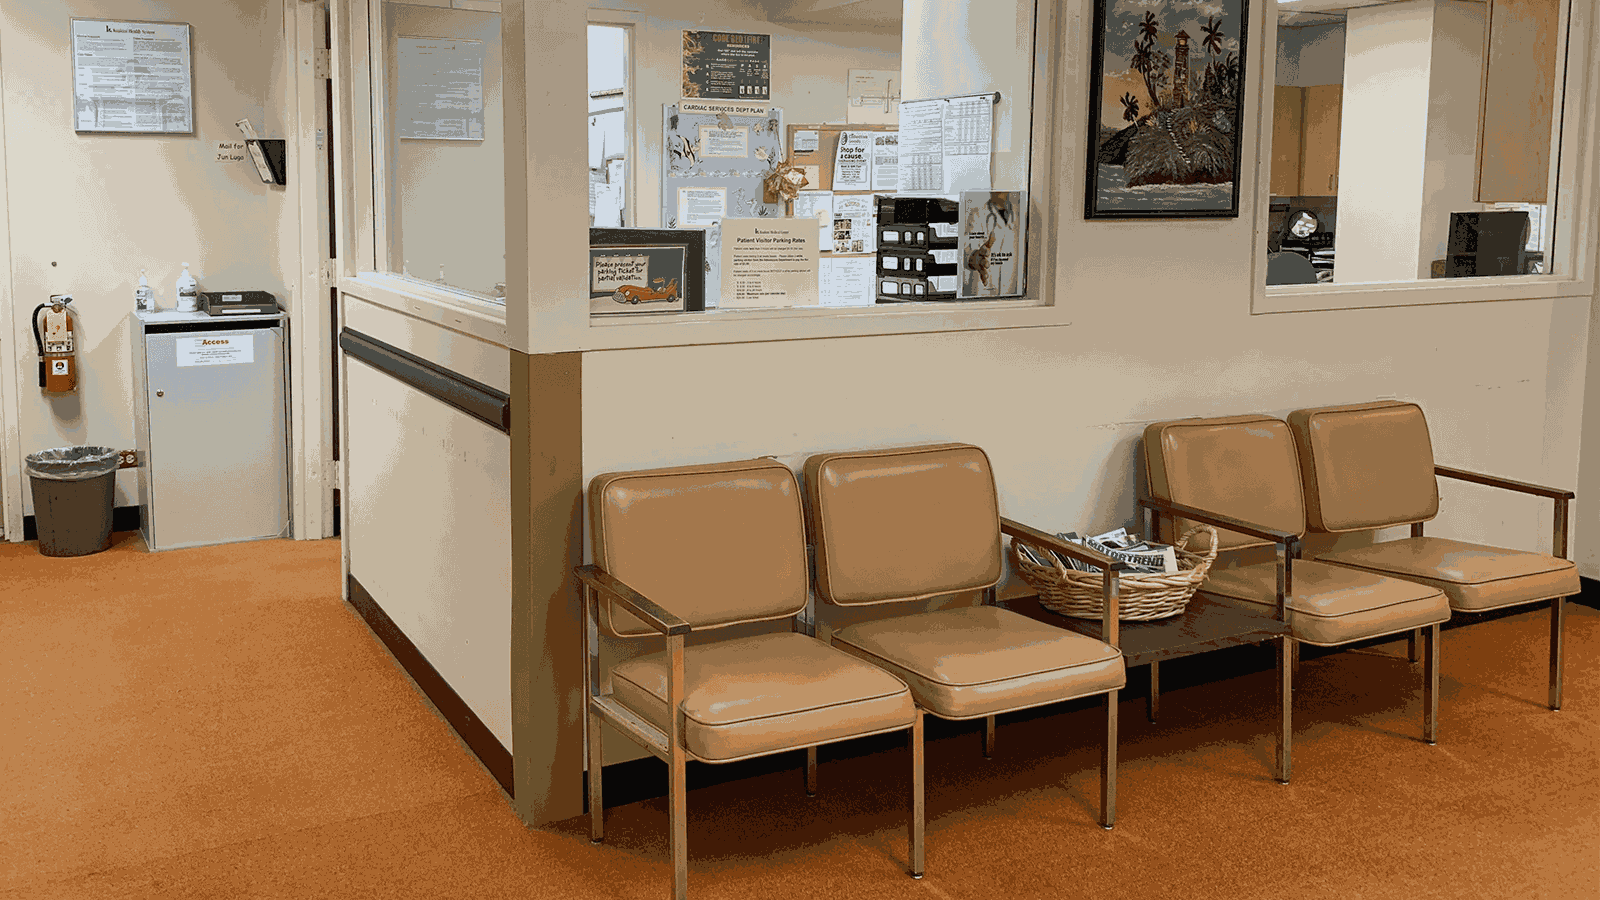 An empty waiting room in a doctor's office